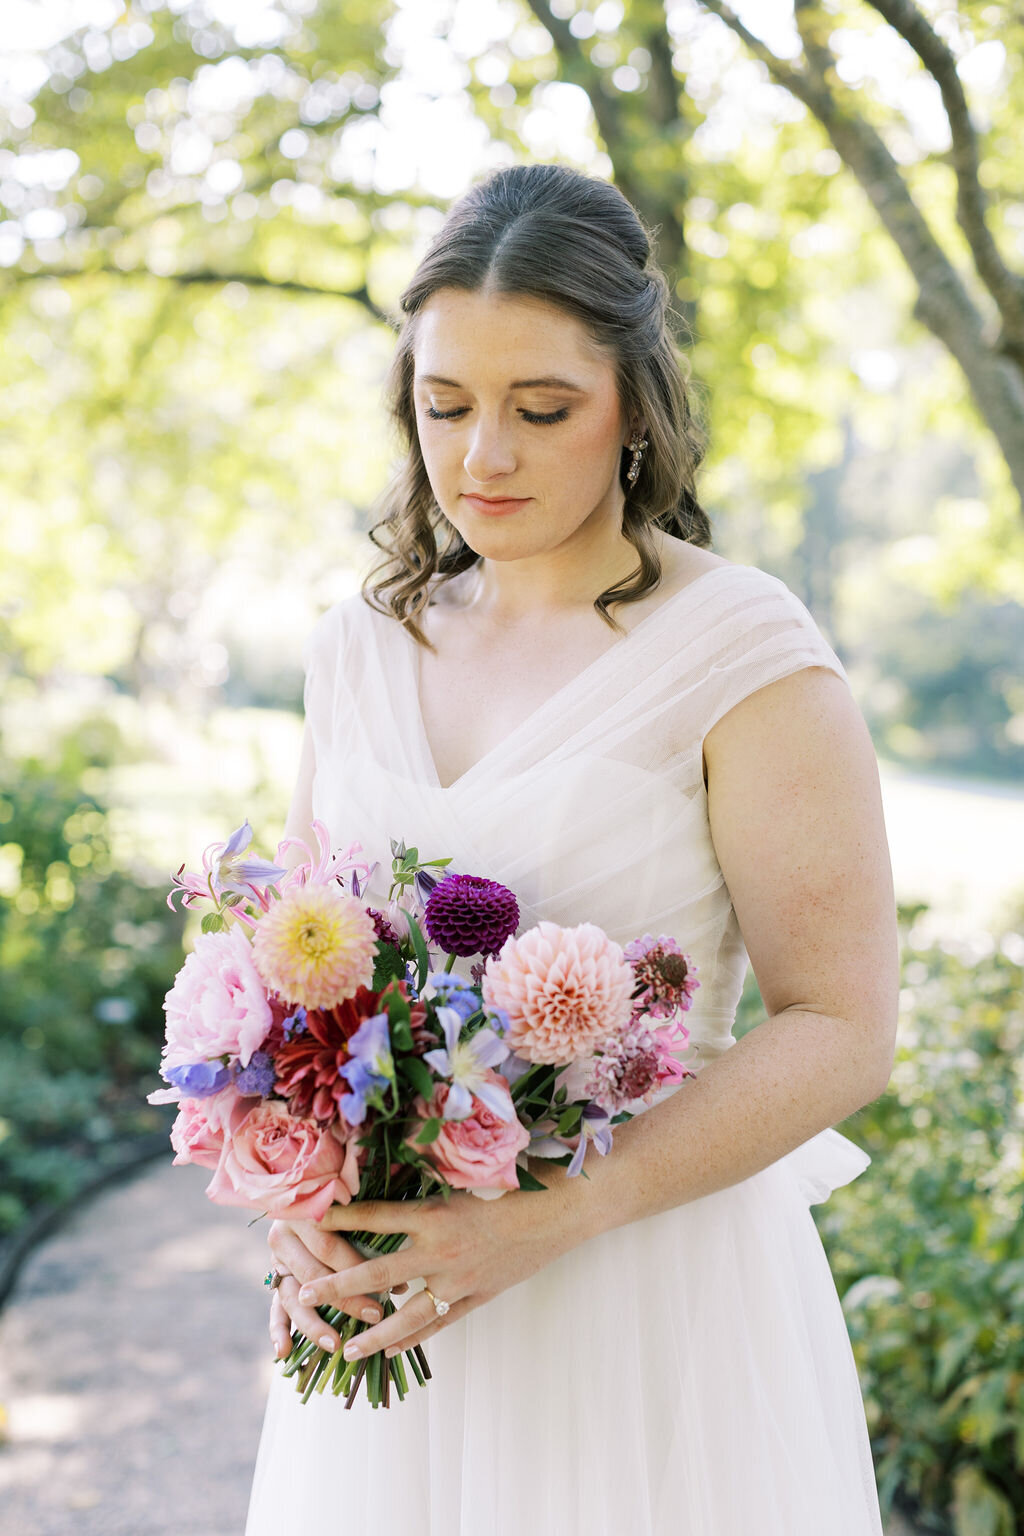 A woman looks down at a bouquet of flowers